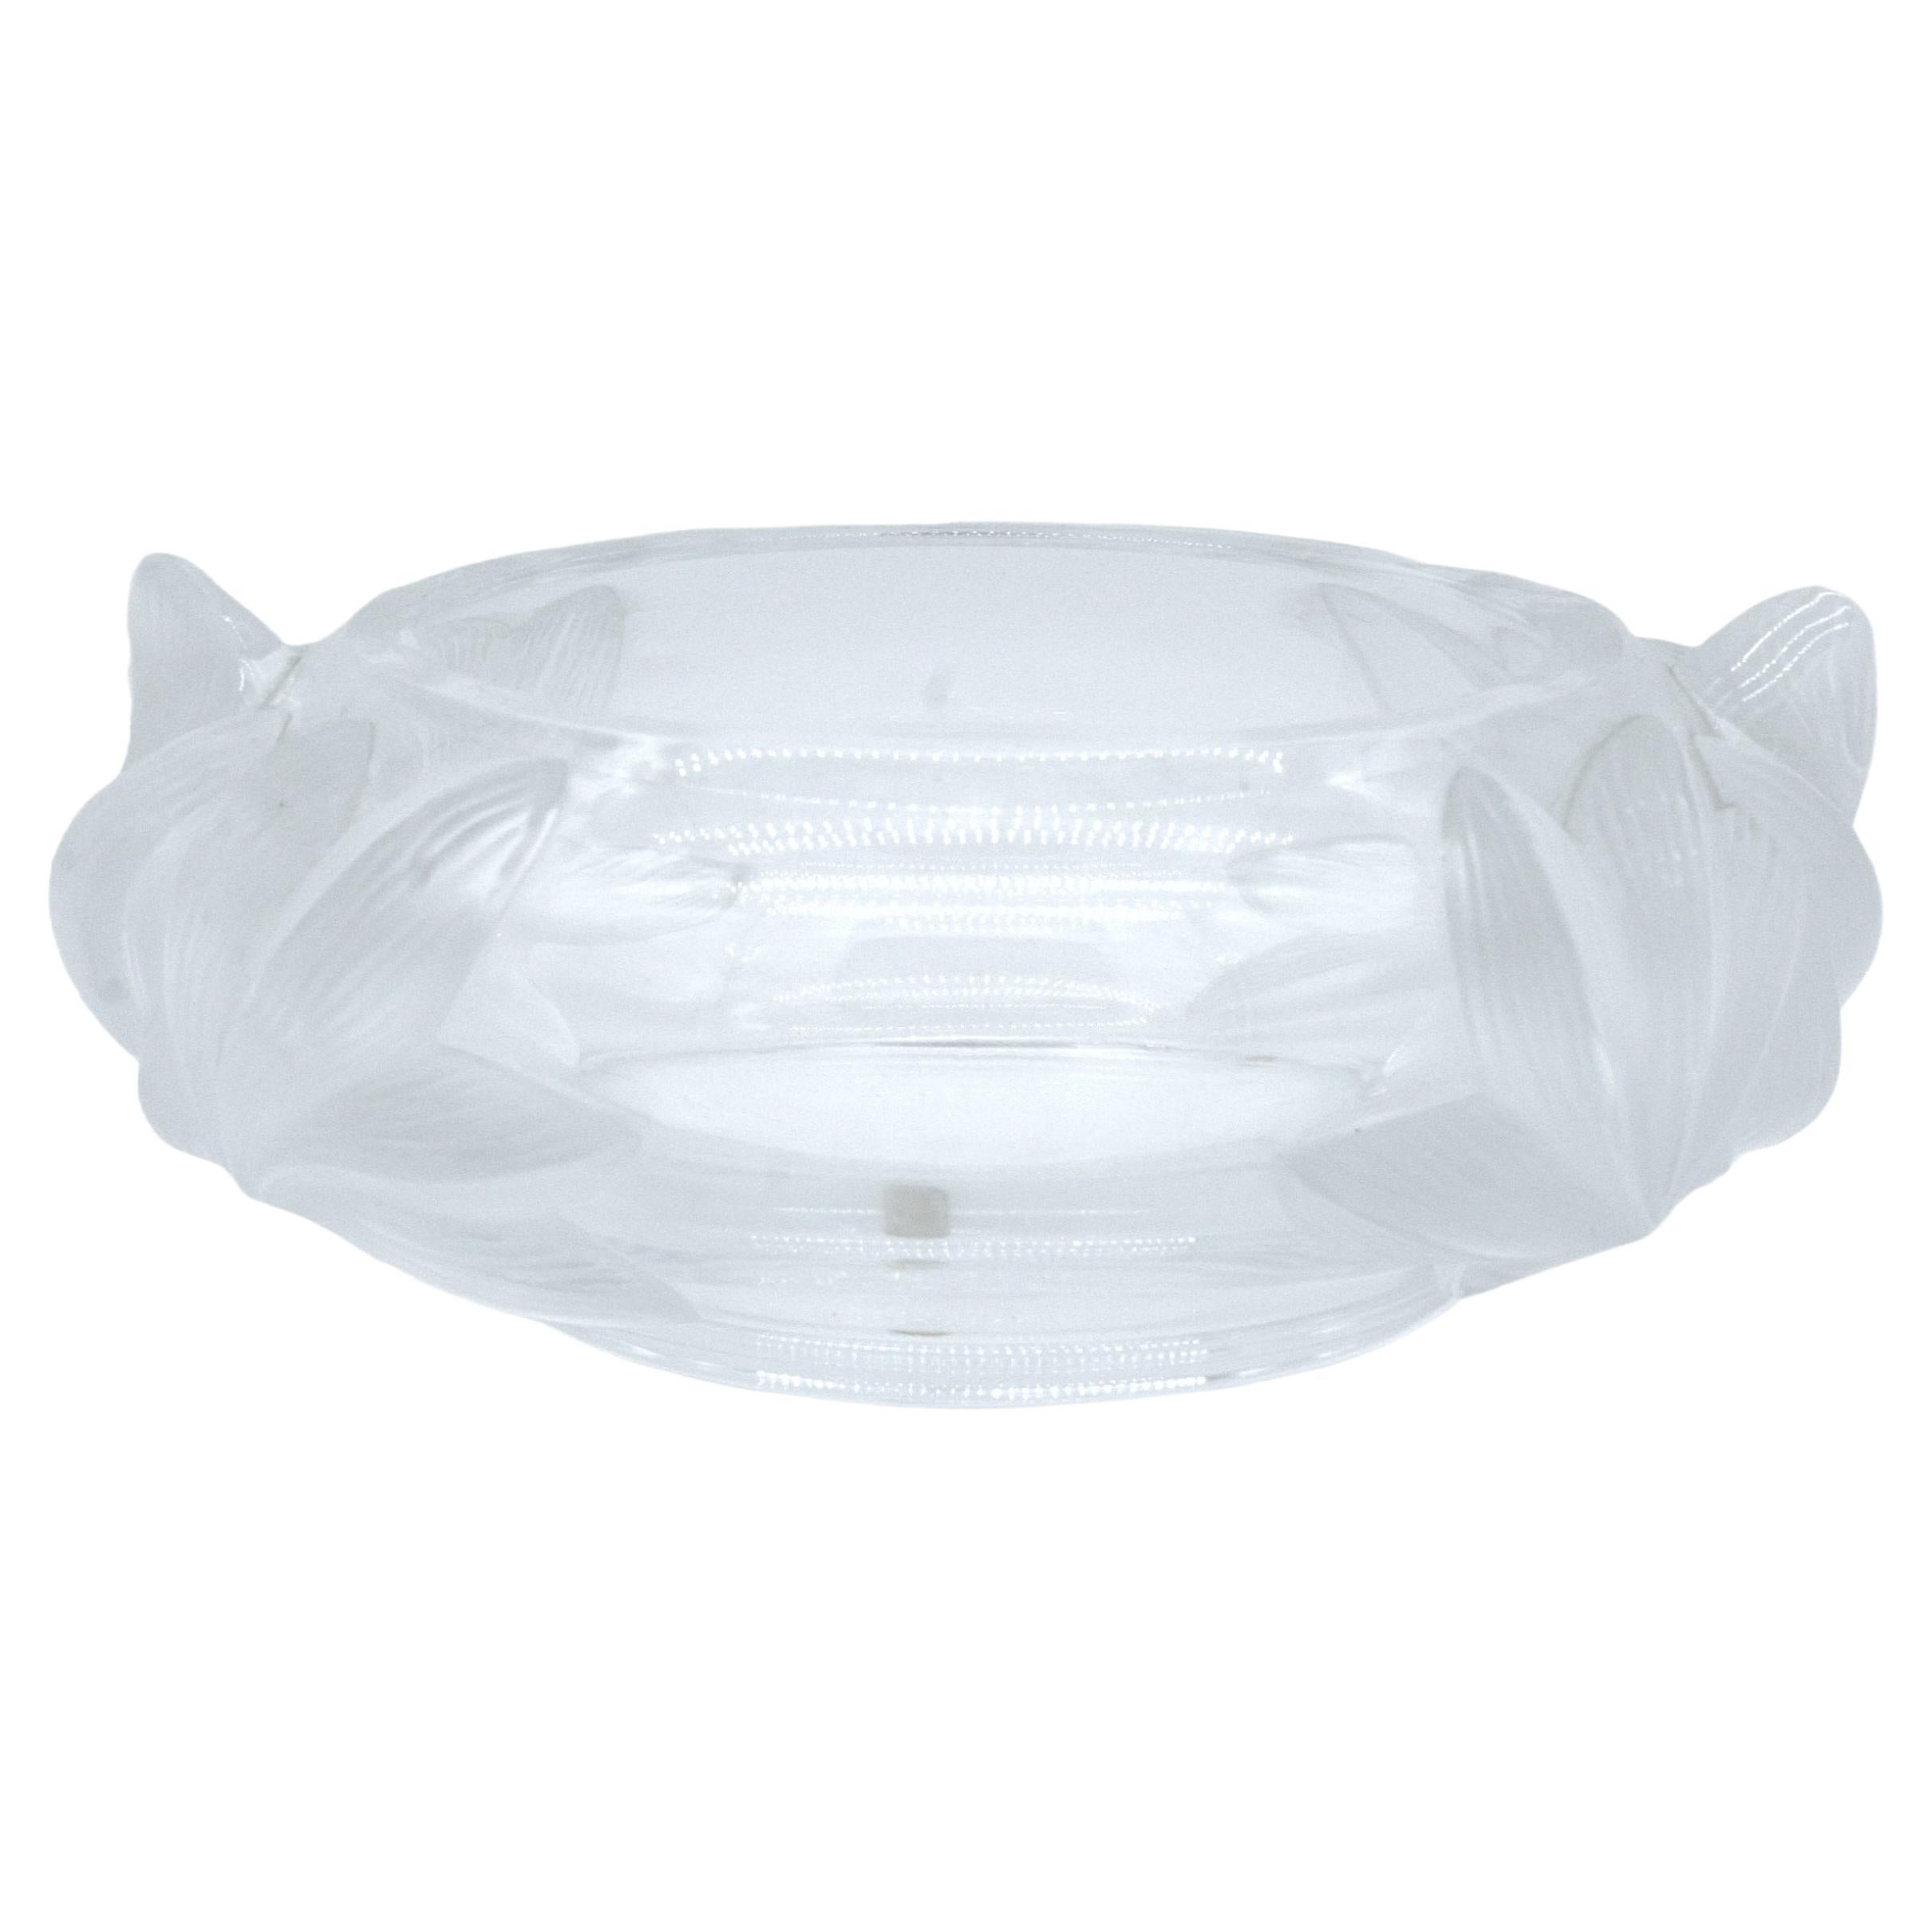 Beautifully Crafted Lalique Centerpiece